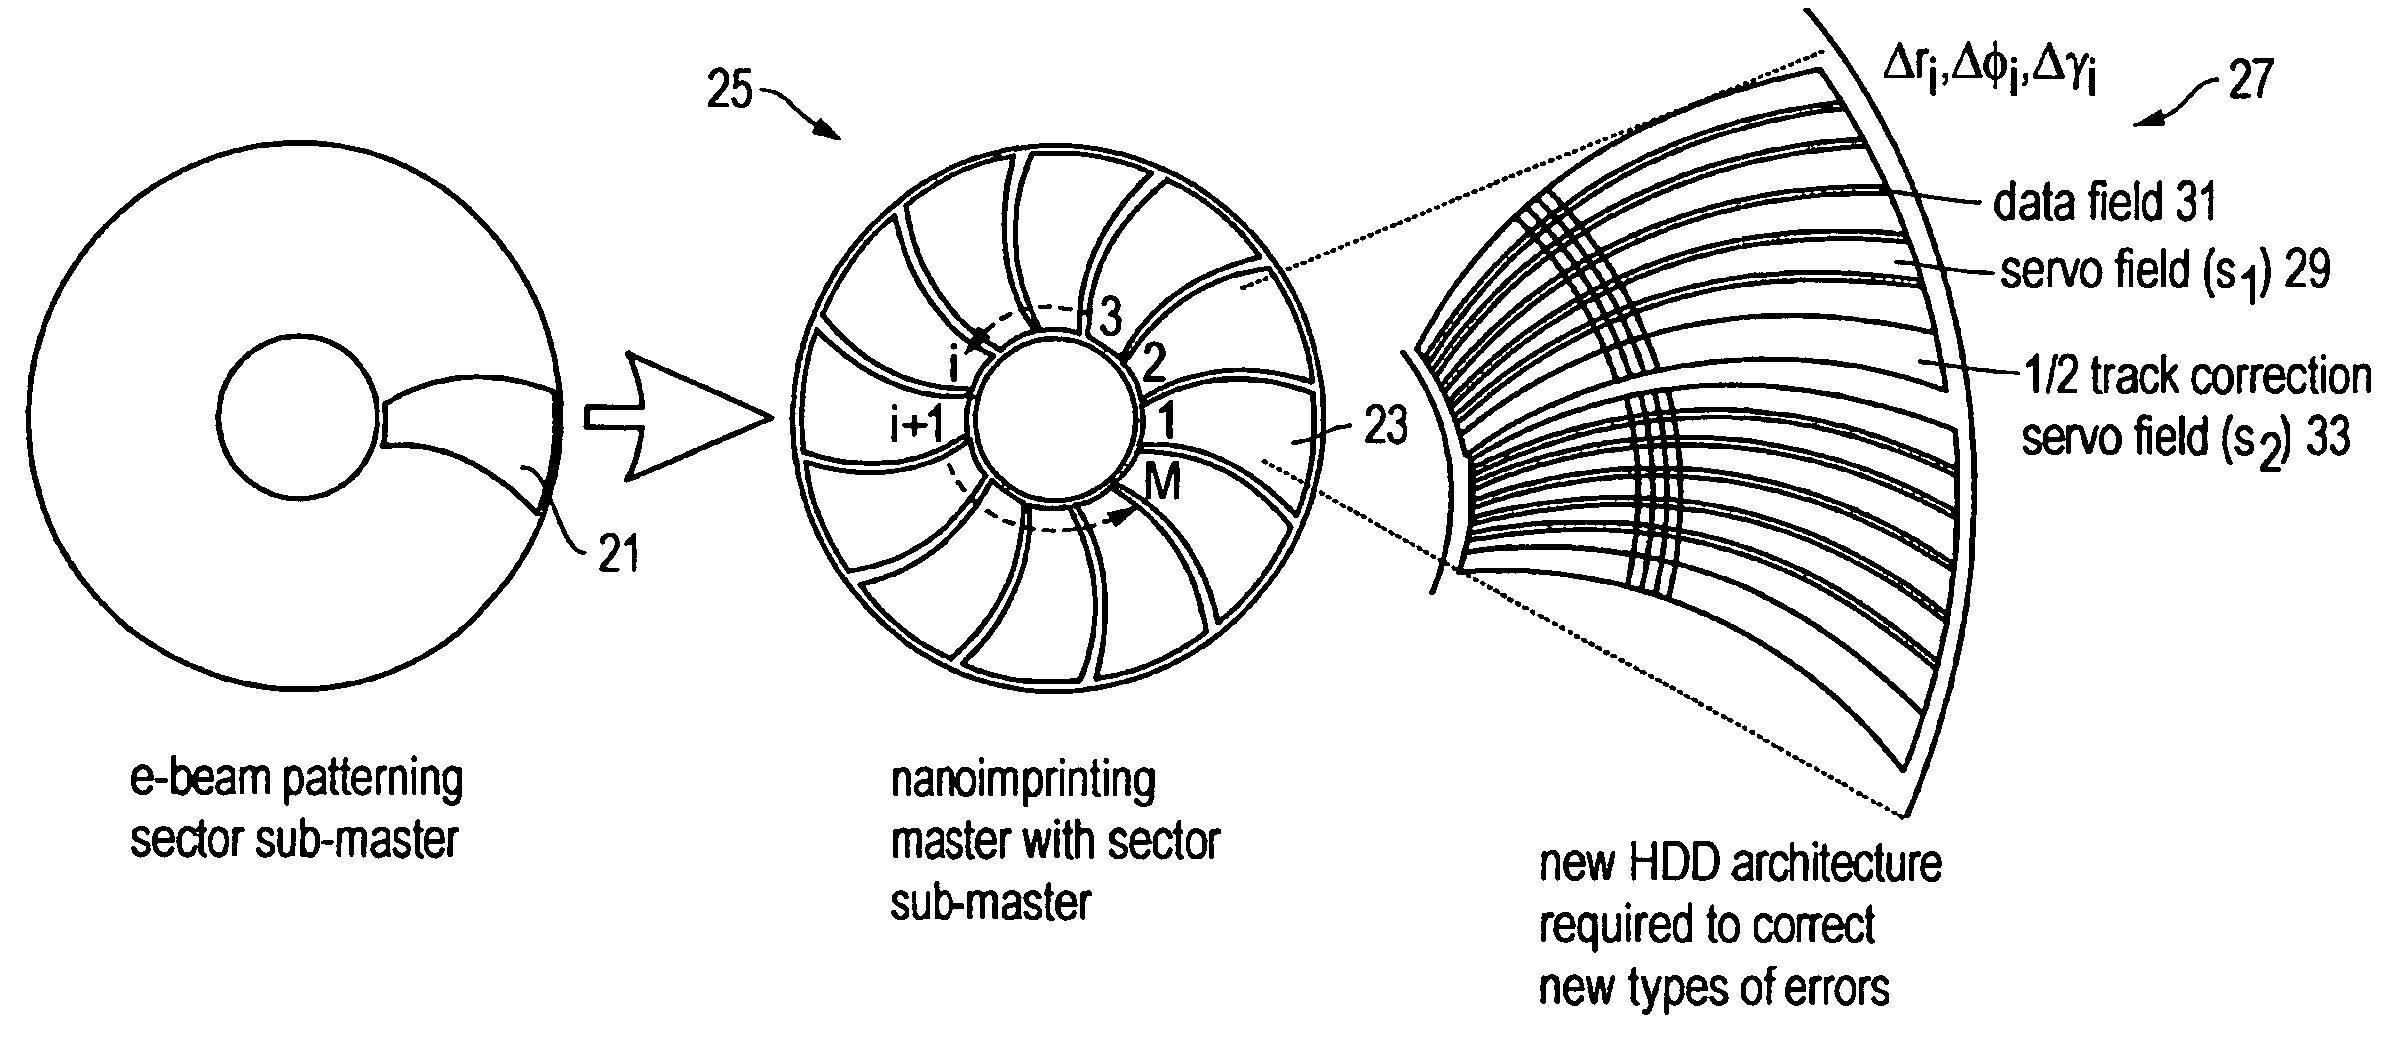 System, method, and apparatus for forming a patterned media disk and related disk drive architecture for head positioning